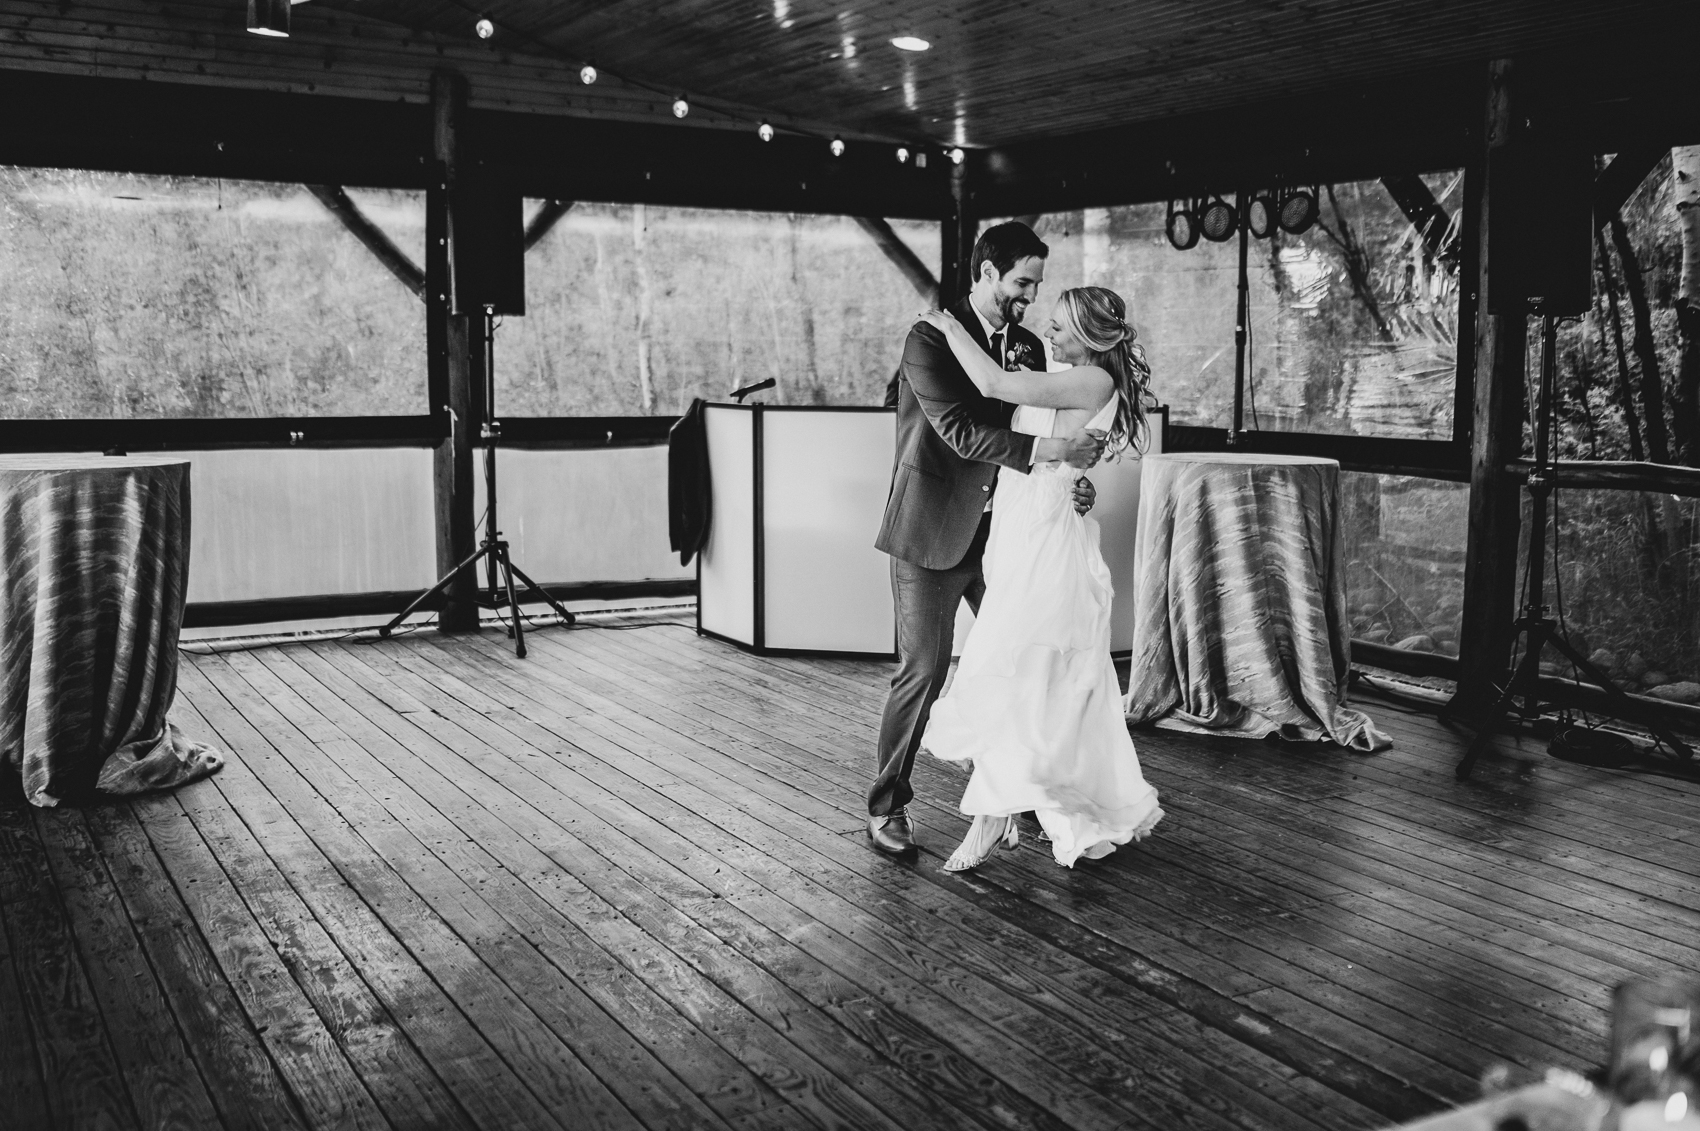 A couple shares a first dance at a wedding reception on the deck of Grand Lake Lodge.